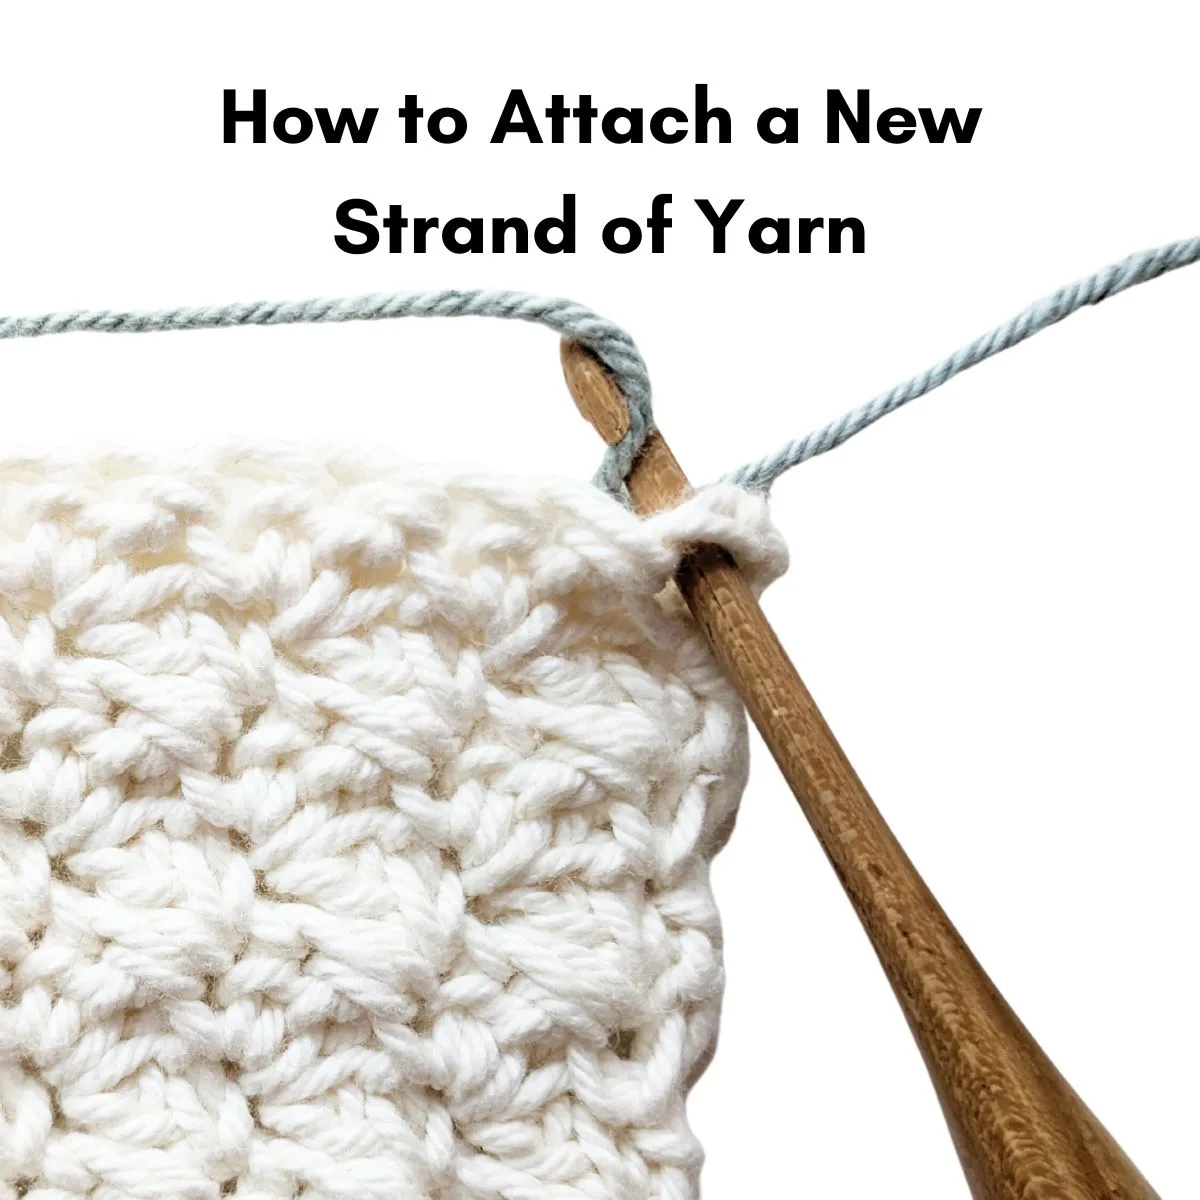 How to attach a new strand of yarn.